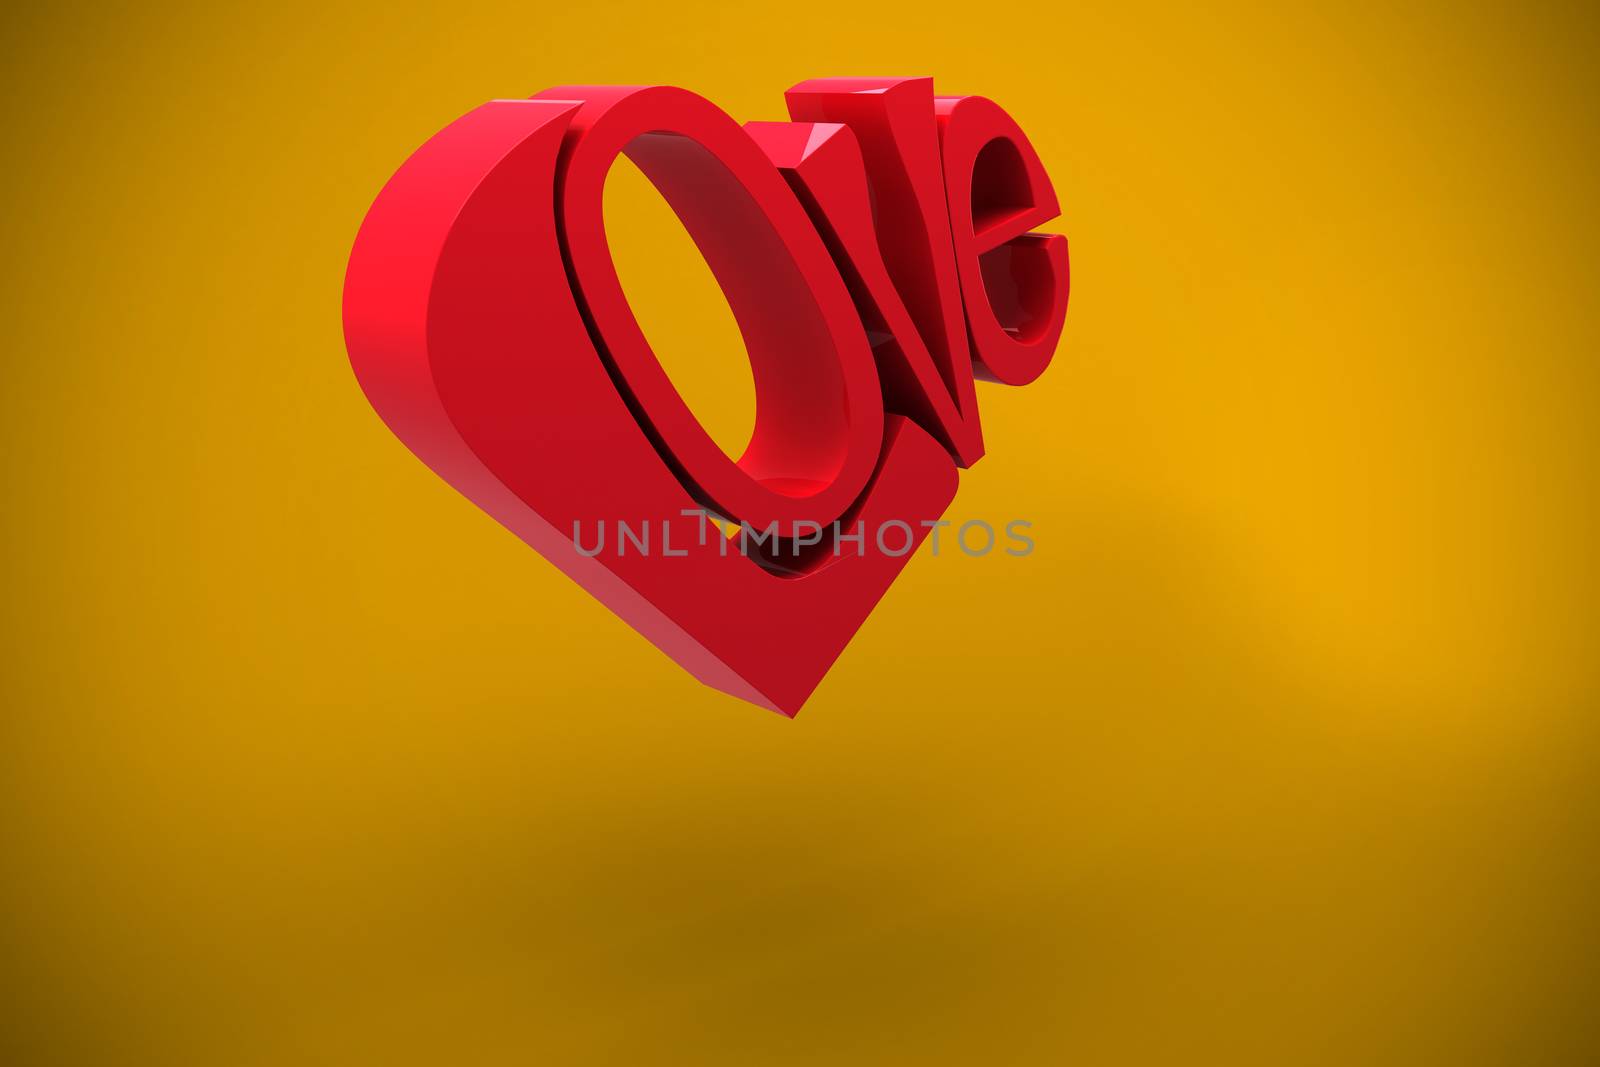 Love heart against yellow background with vignette